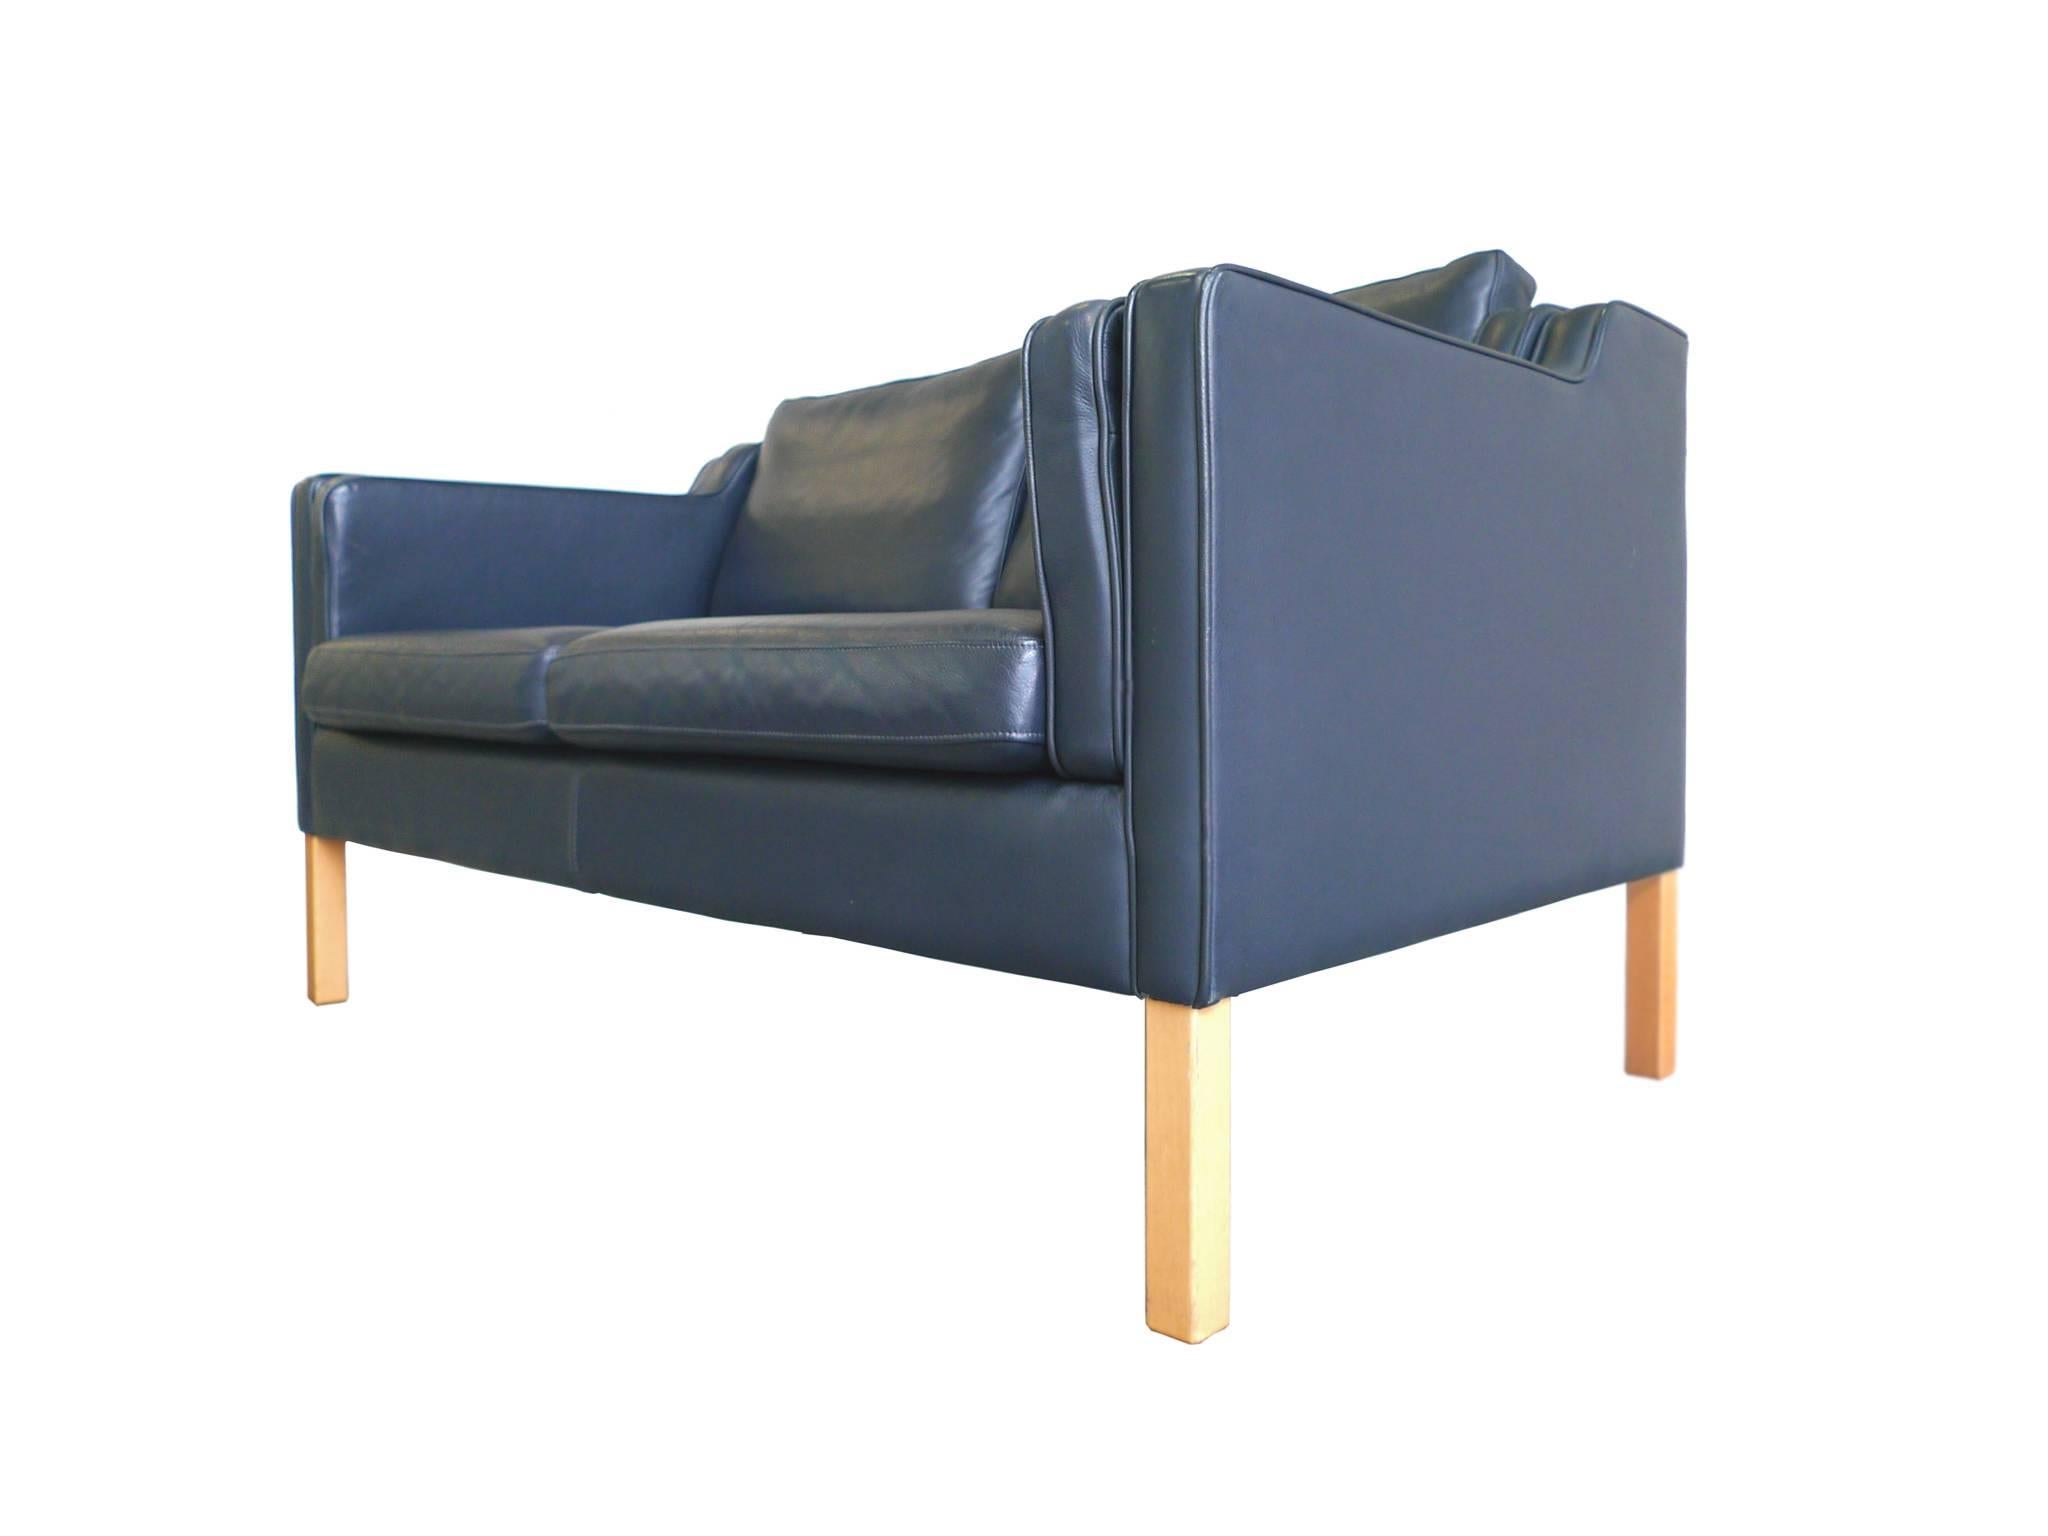 This settee is in the style of Børge Mogensen and was manufactured by Stouby. Its design is one of clean lines and soft, rounded edges. The upholstery is a dark cobalt blue leather, while the frame is beech wood. The settee has a low back and